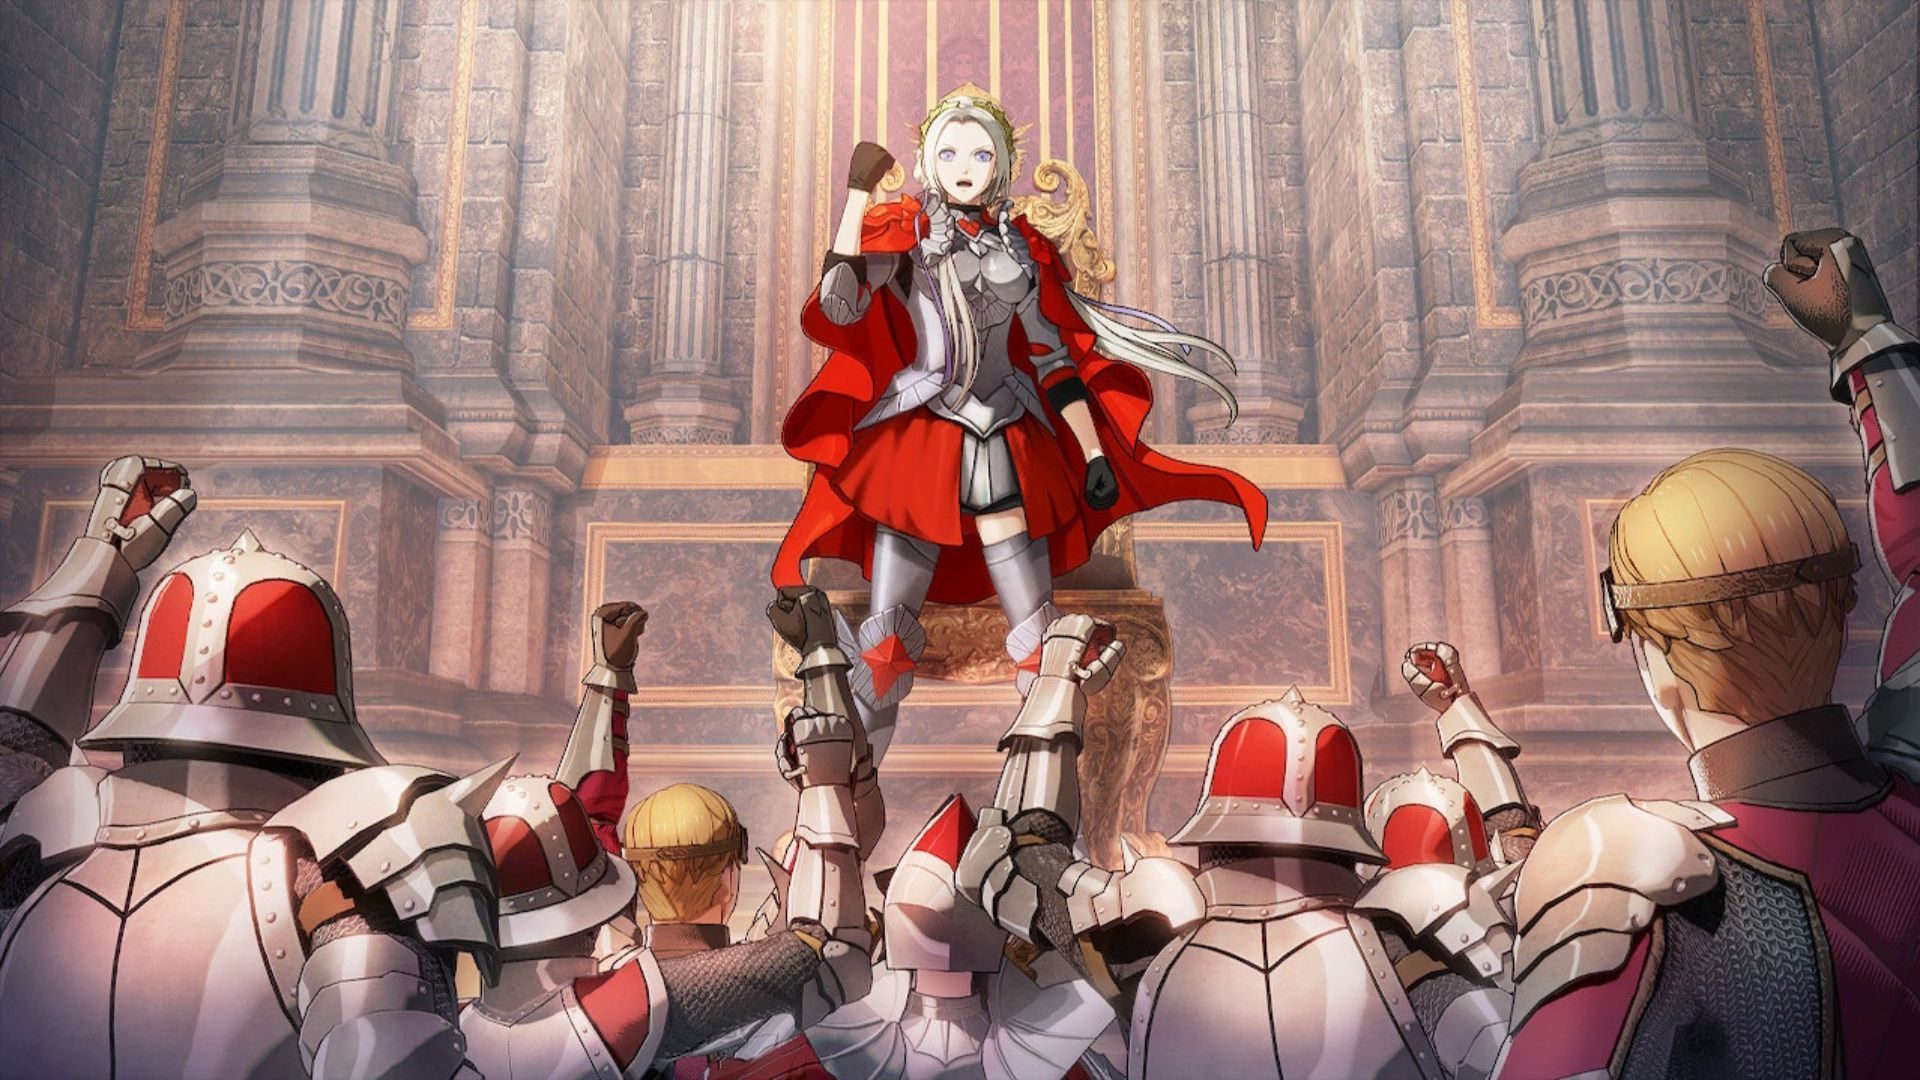 Game Review: Nintendo's 'Fire Emblem: Three Houses' is well made